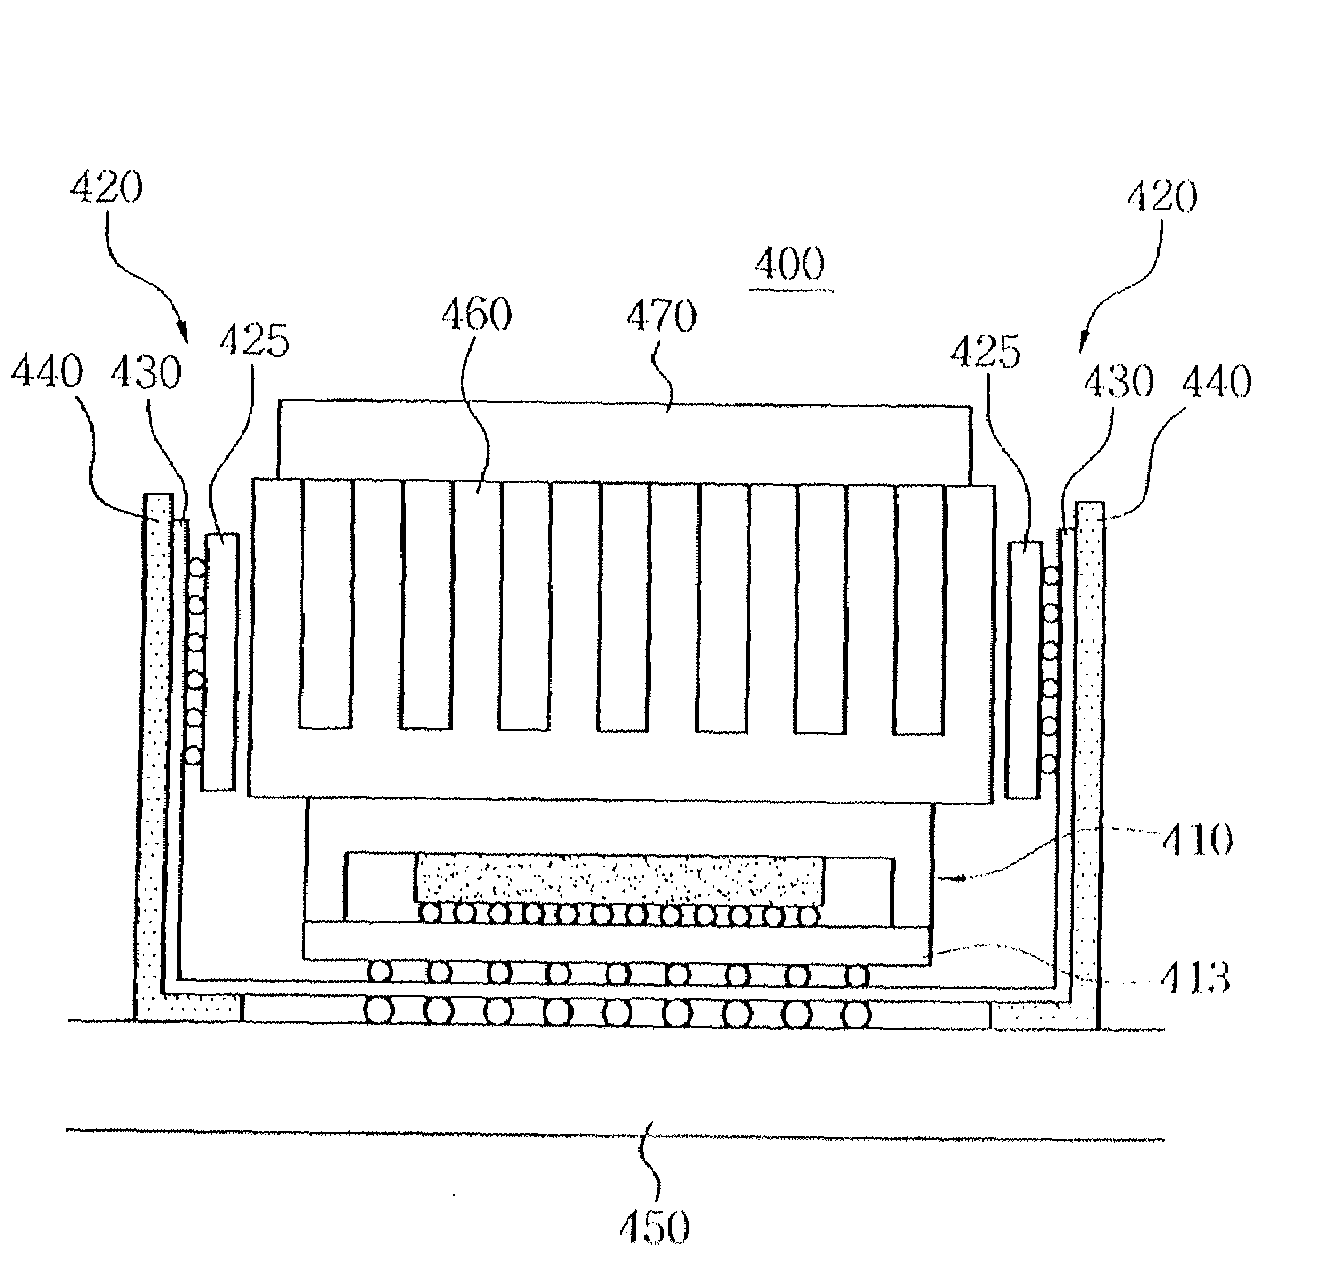 Semiconductor module and an electronic system including the same